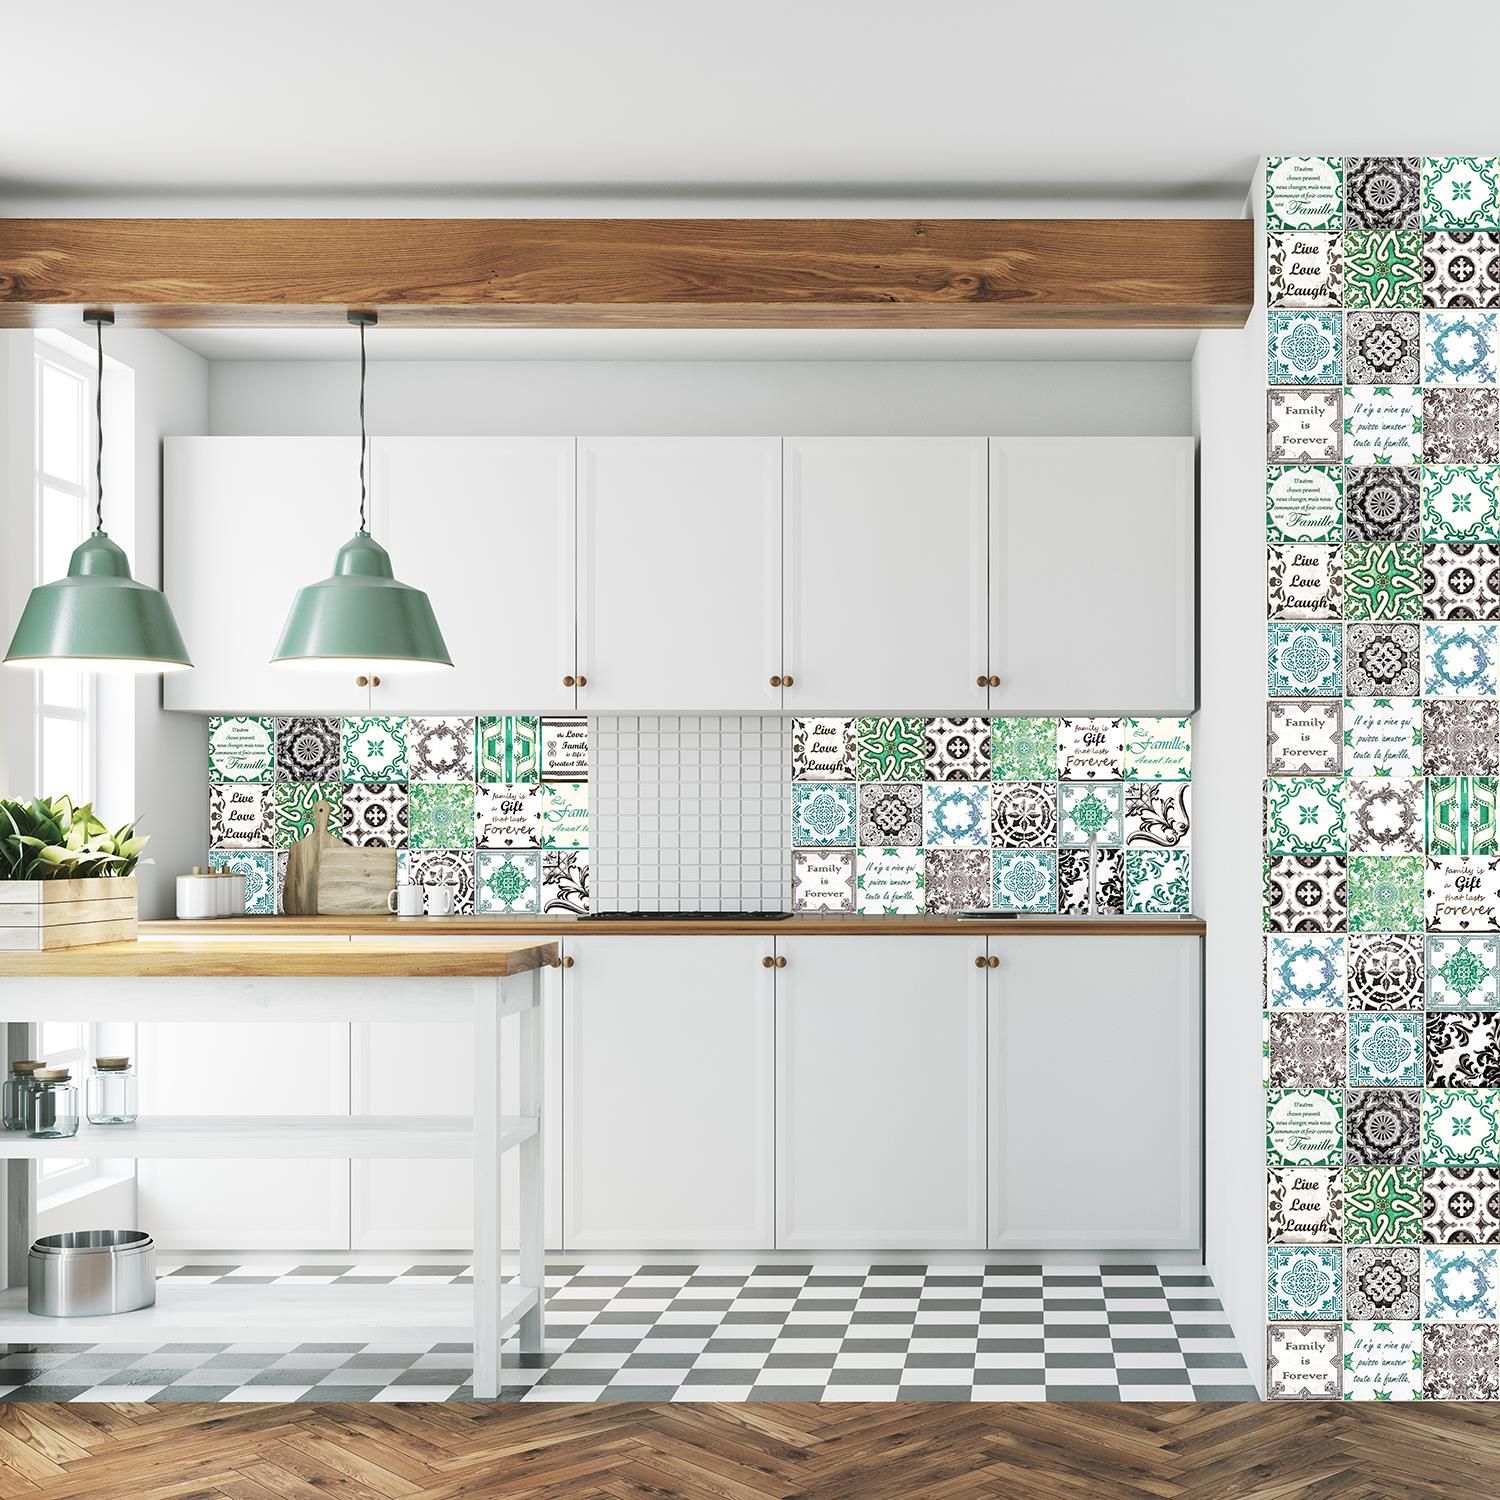 - Leave nothing to chance with our finely hand selected tiled stickers, that ensure the maximum allure for your desired home update. 
- The green and blue palate is simple enough to blend with your other decor accessories, or to be bold and beautiful on its lonesome! 
- One time installation of the quality Walplus stickers promises that after you attach it to your clean, dry wall, all that's left to do is enjoy your home's new look!
- Package Contains:  48 pieces of stickers 15 x 15 cm and a free pack of 3in1 application tools is included. Coverage area: 1.08m2.